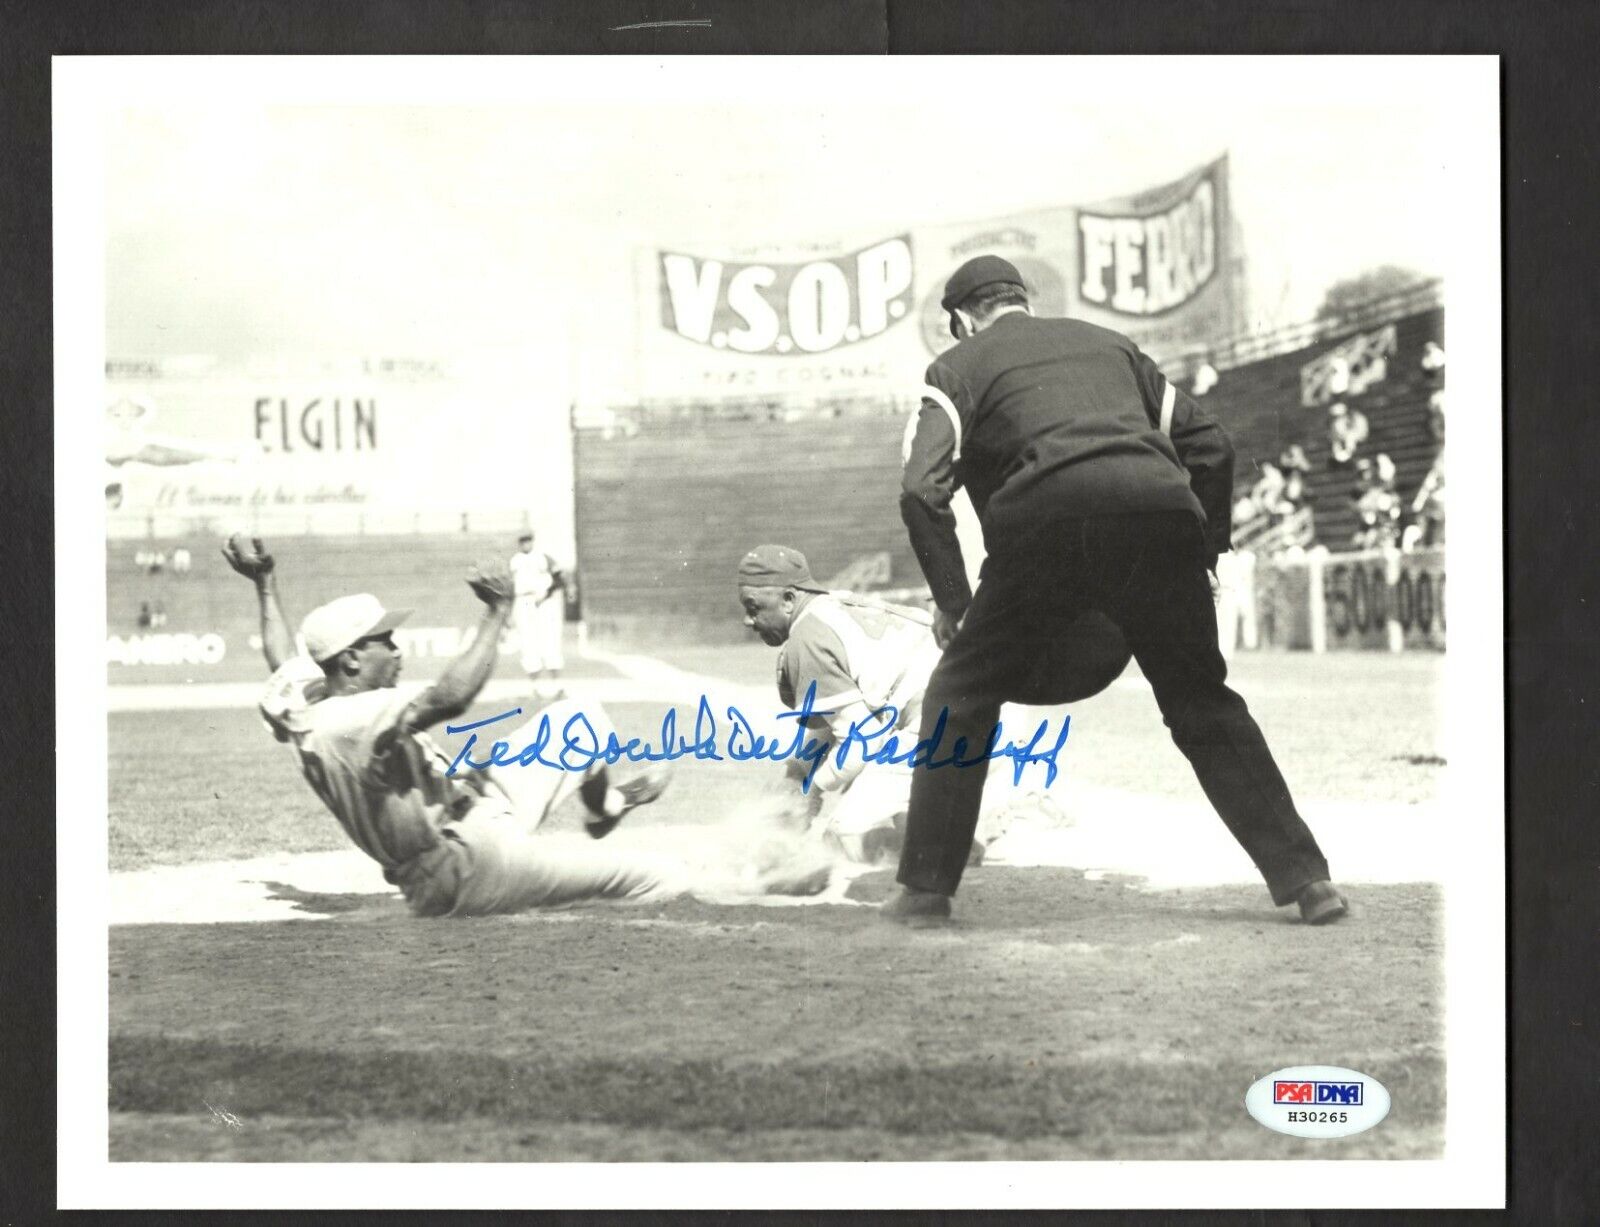 Ted Double Duty Radcliffe Negro League Signed 8 x 10 Photo Poster painting PSA/DNA  SHIP